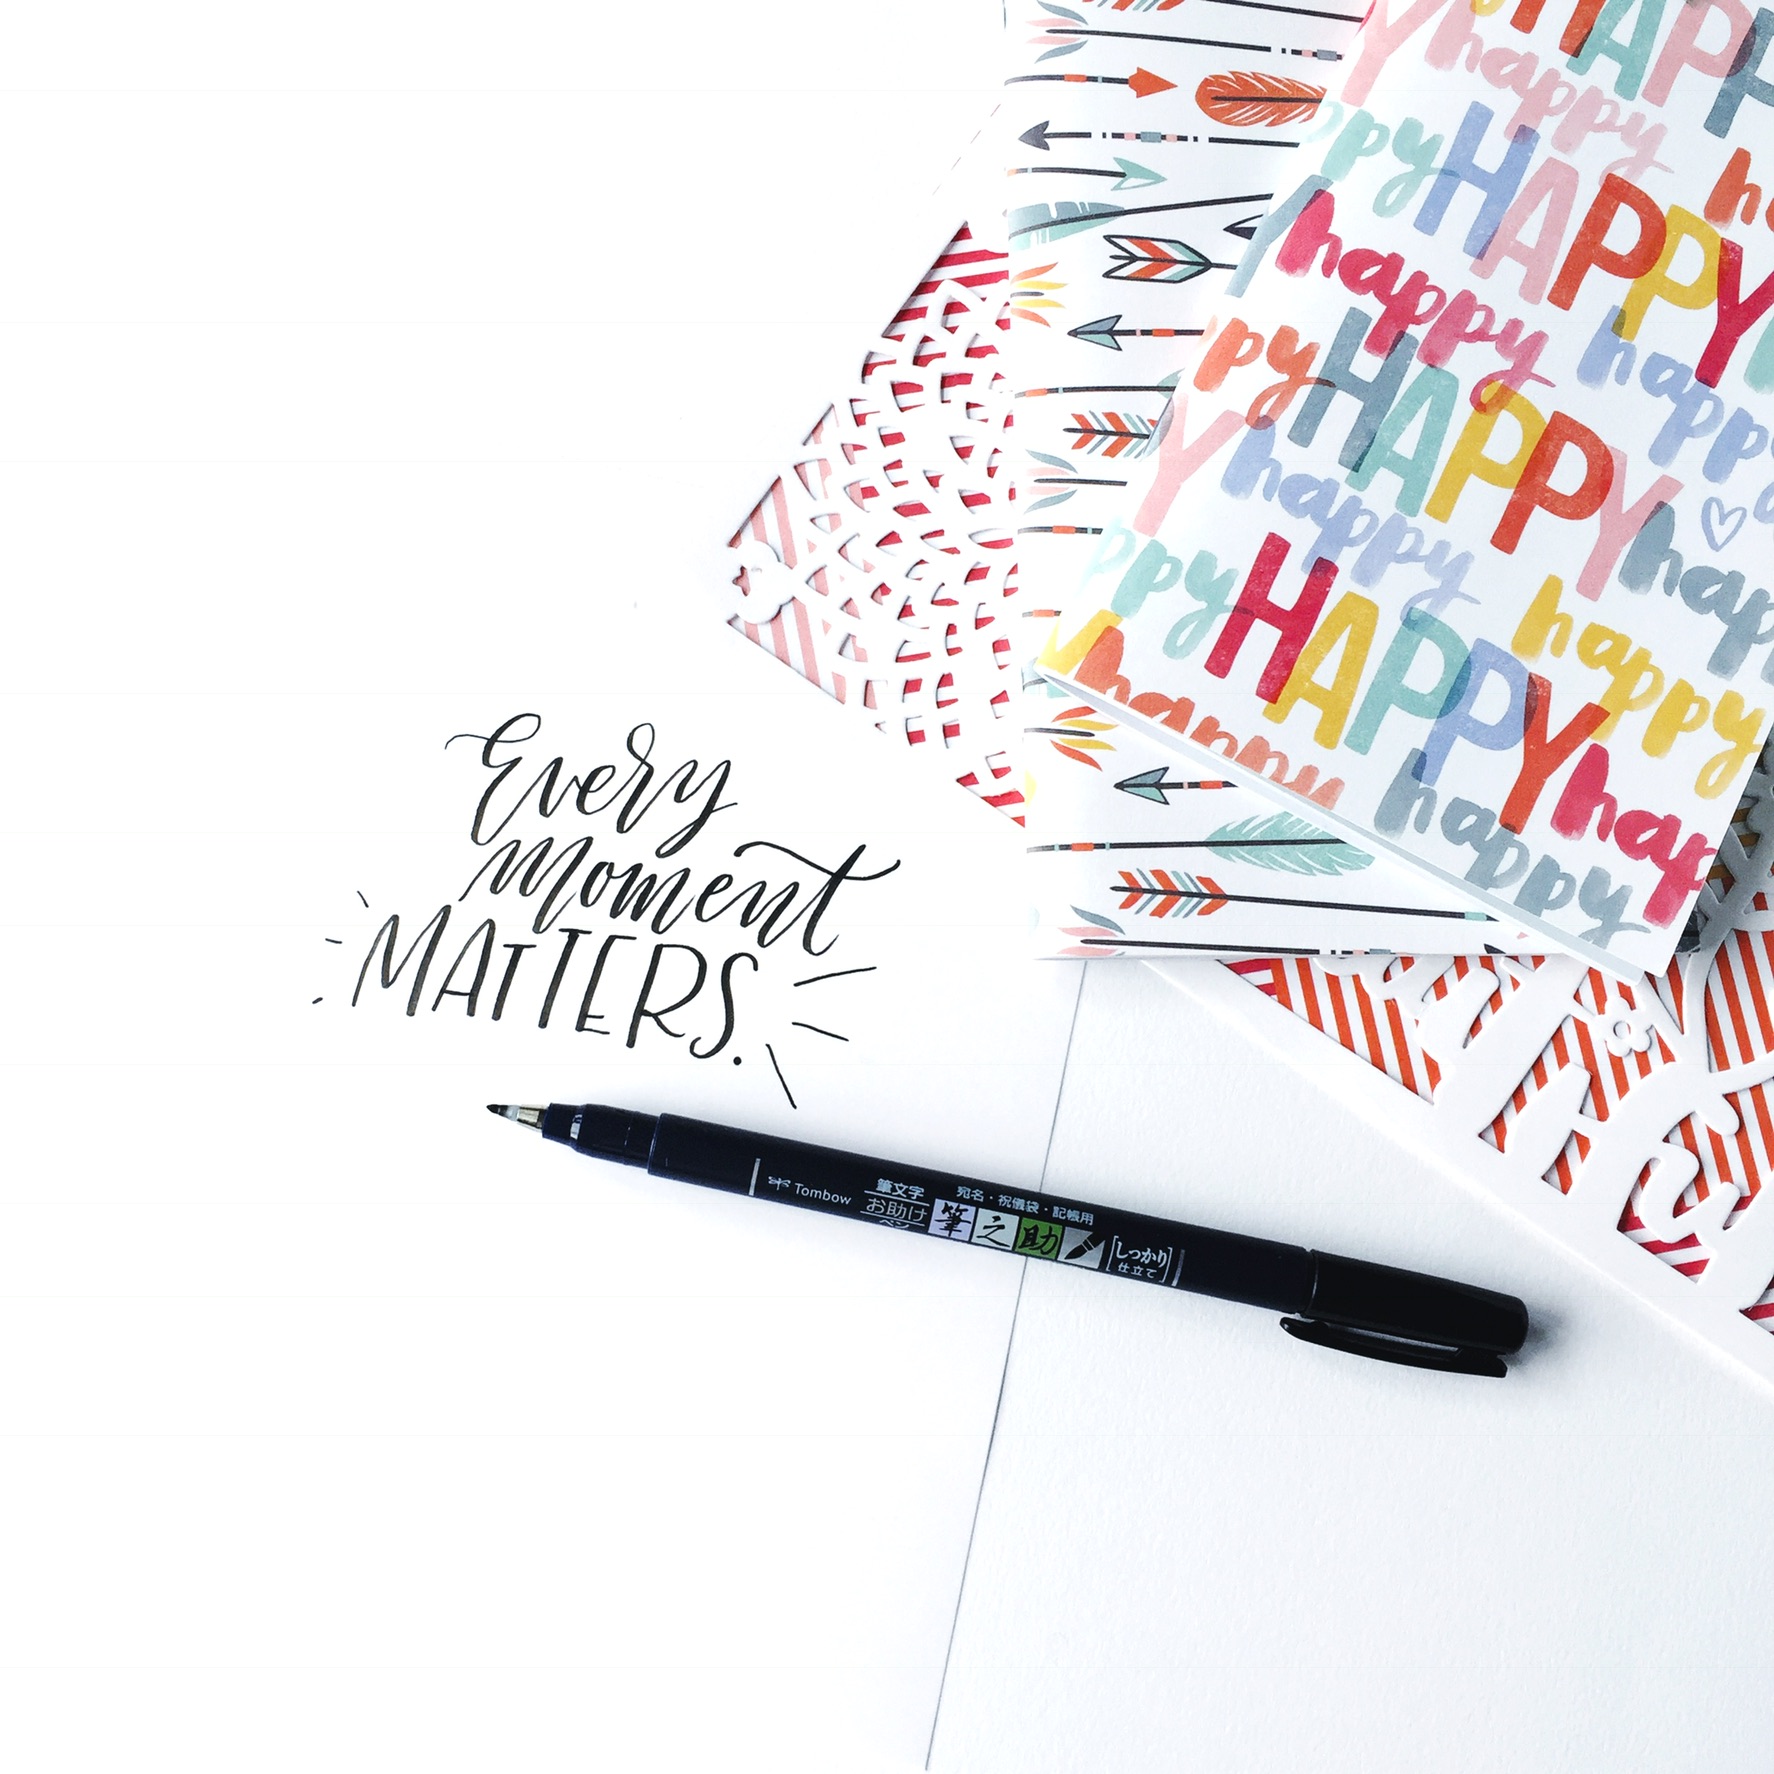 3 Ways to Style Your Lettering Photos with Scrapbooking Supplies